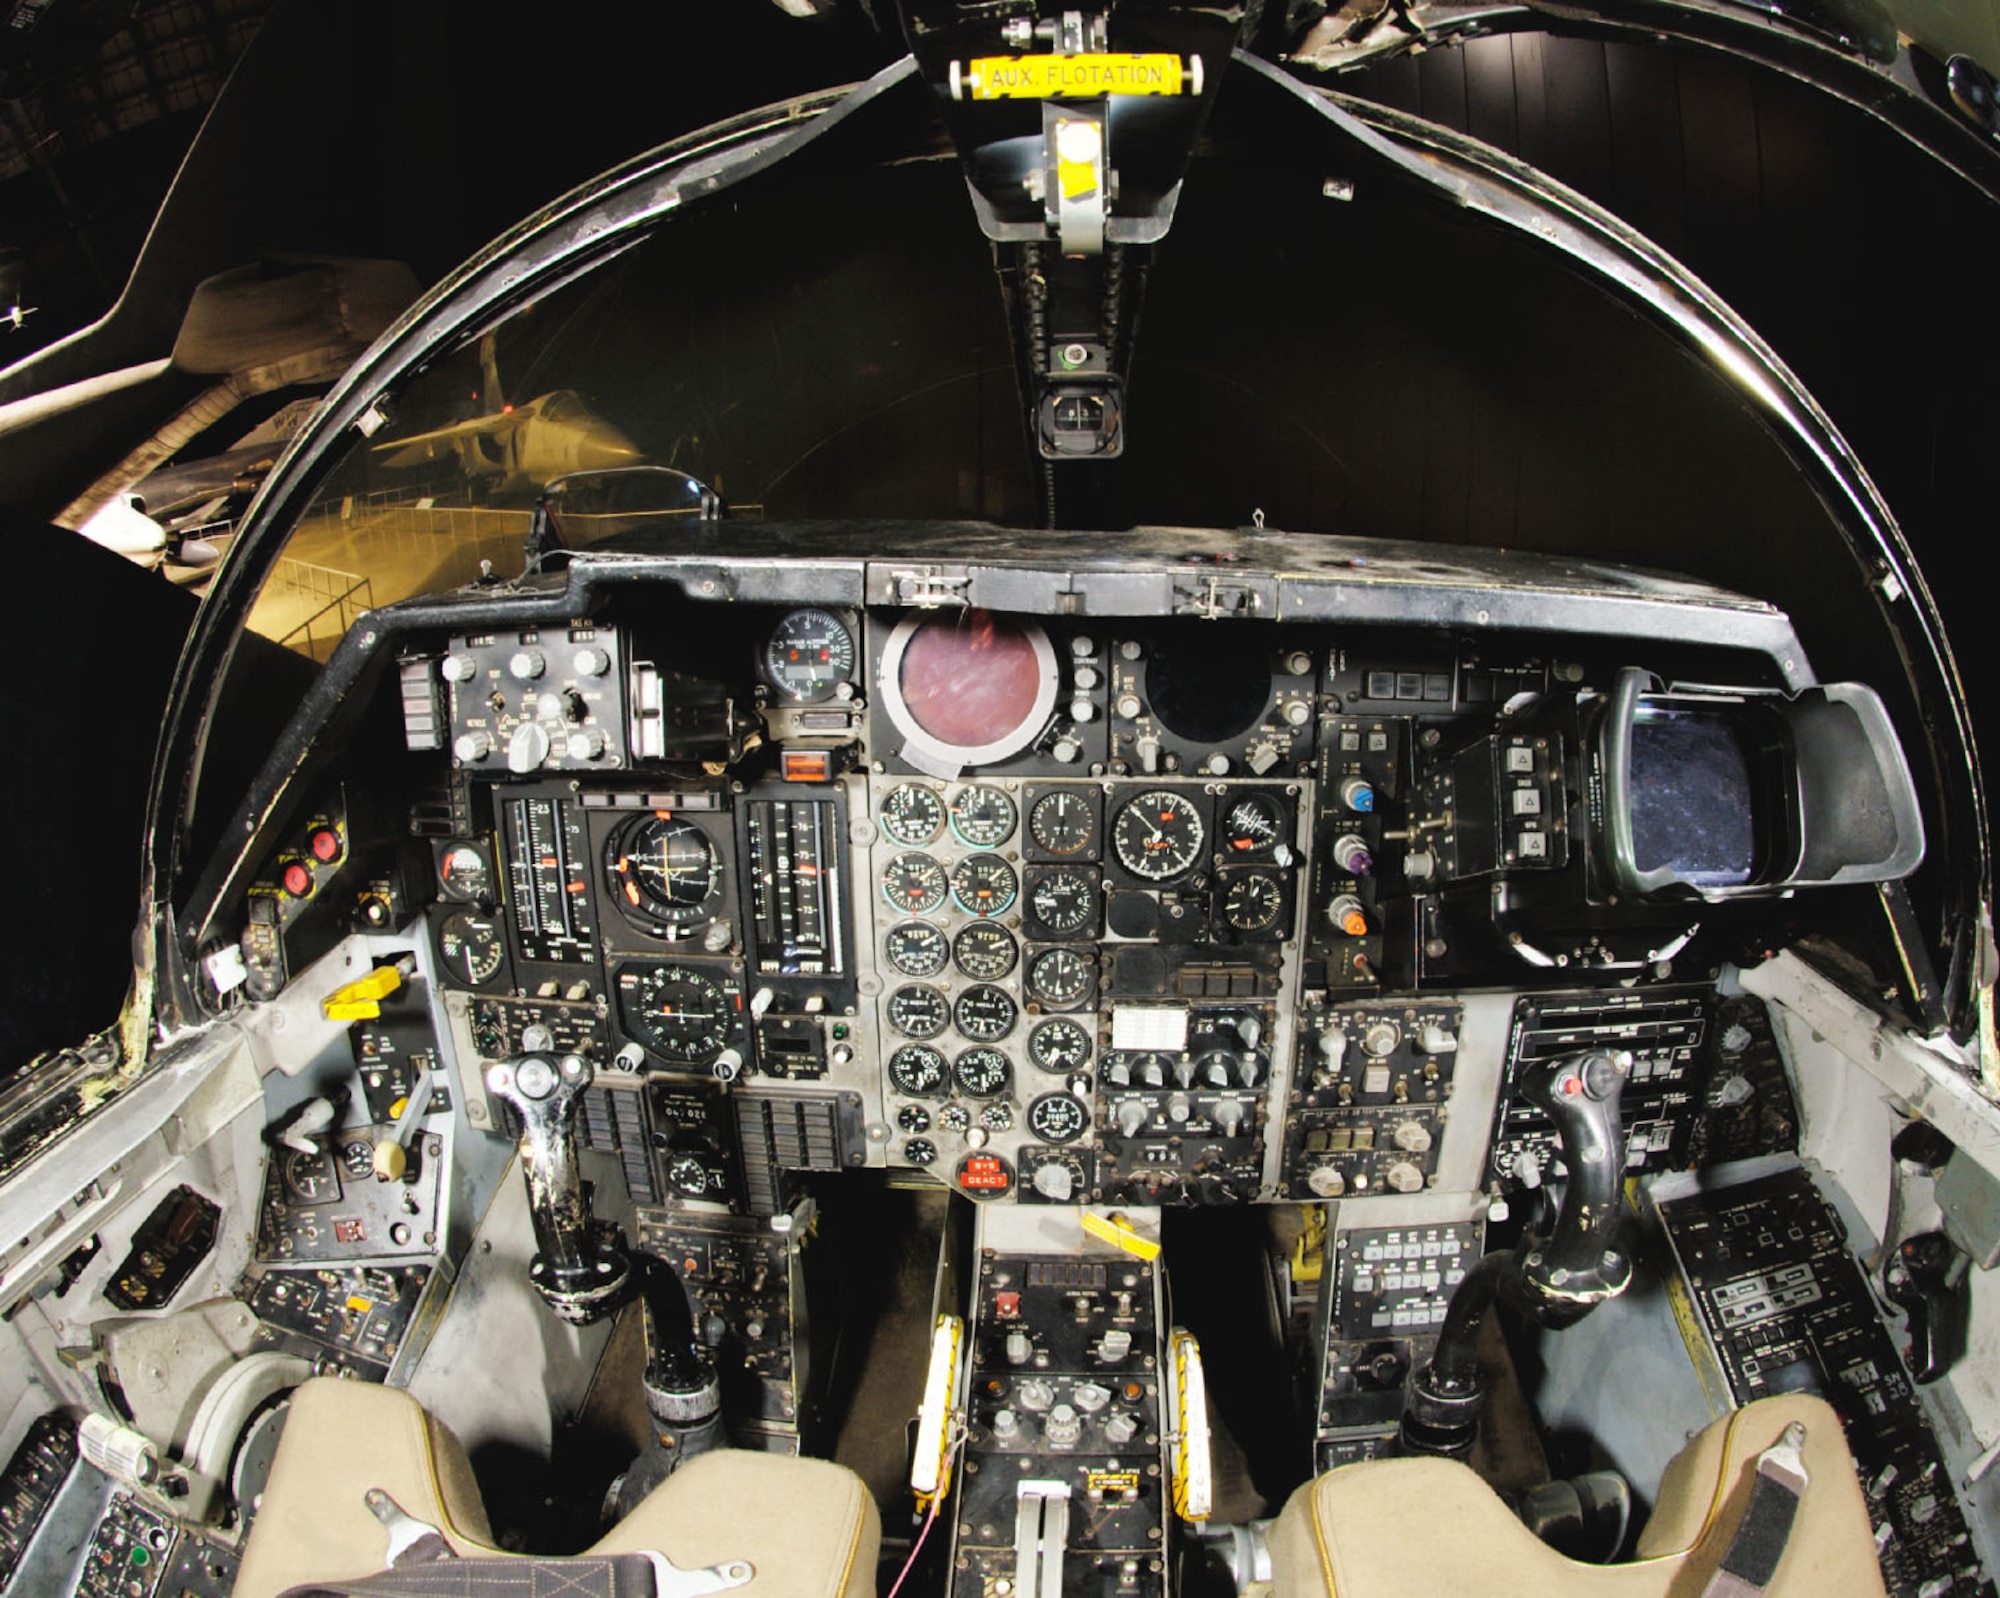 DAYTON, Ohio -- General Dynamics F-111F cockpit at the National Museum of the United States Air Force. (Photo courtesy of John Rossino, Lockheed Martin Code One)